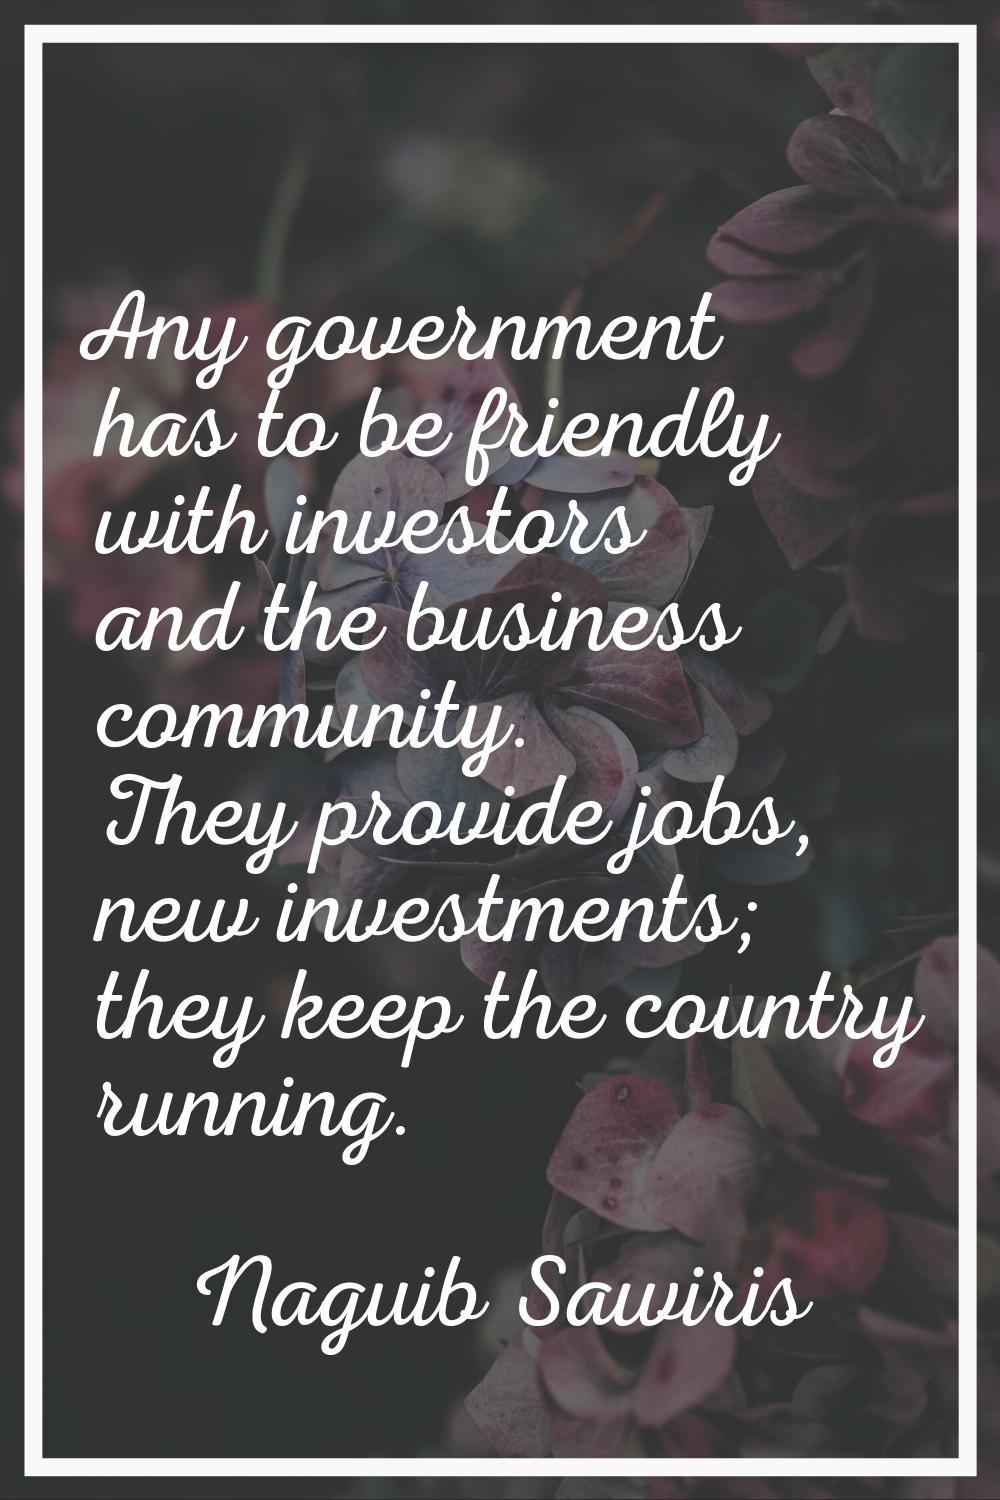 Any government has to be friendly with investors and the business community. They provide jobs, new